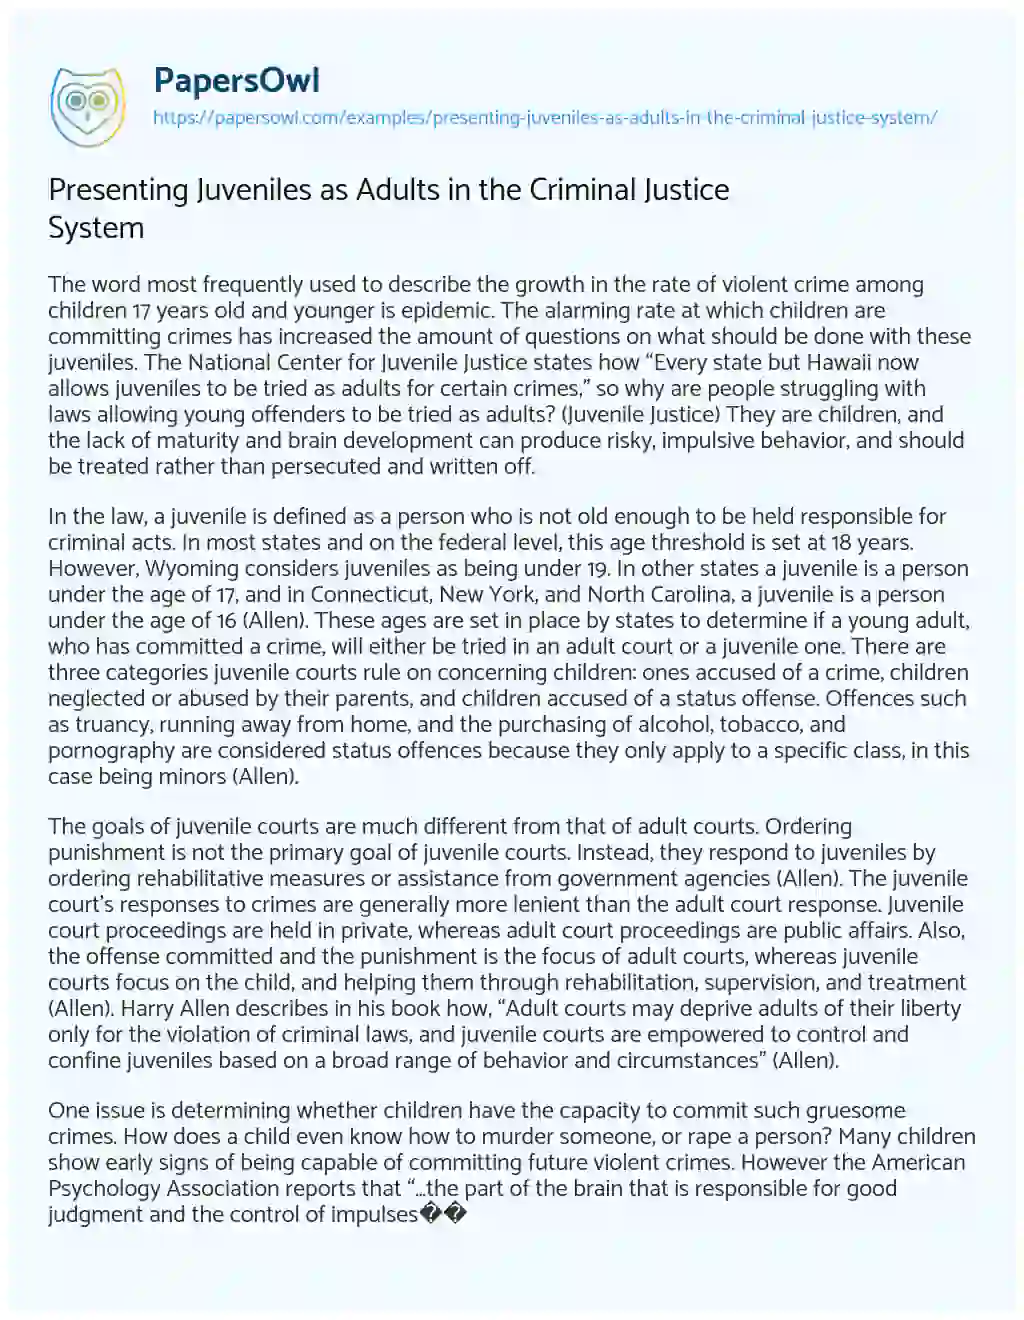 Essay on Presenting Juveniles as Adults in the Criminal Justice System